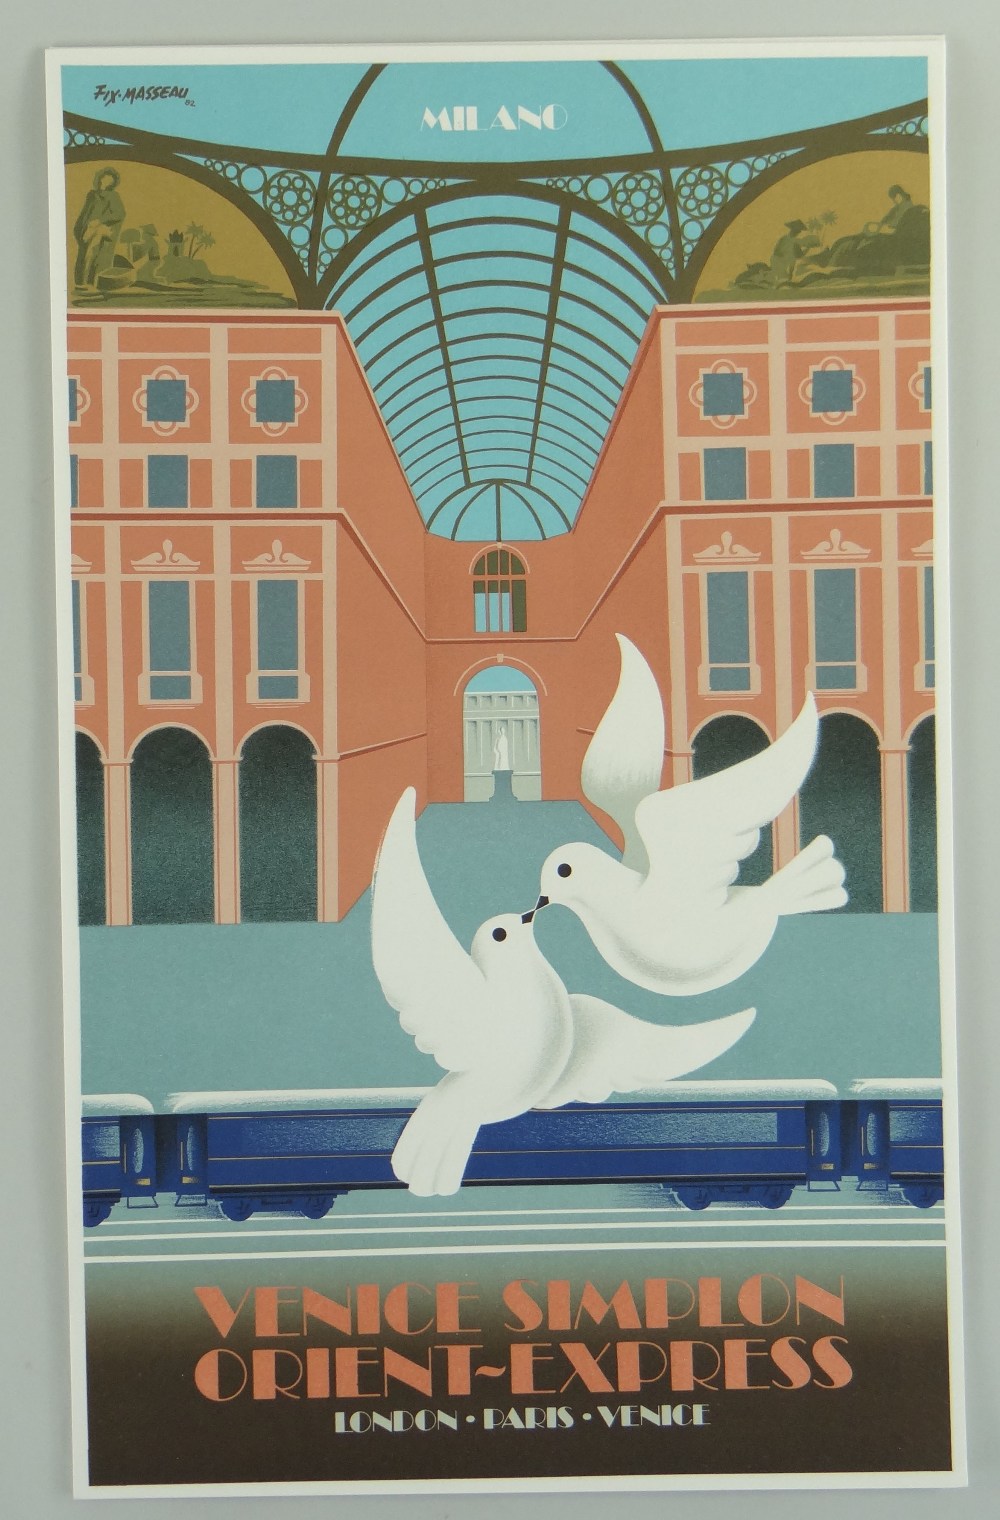 PIERRE FIX-MASSEAU boxed set of twelve limited edition (70/200) coloured lithographs - Venice - Image 8 of 20